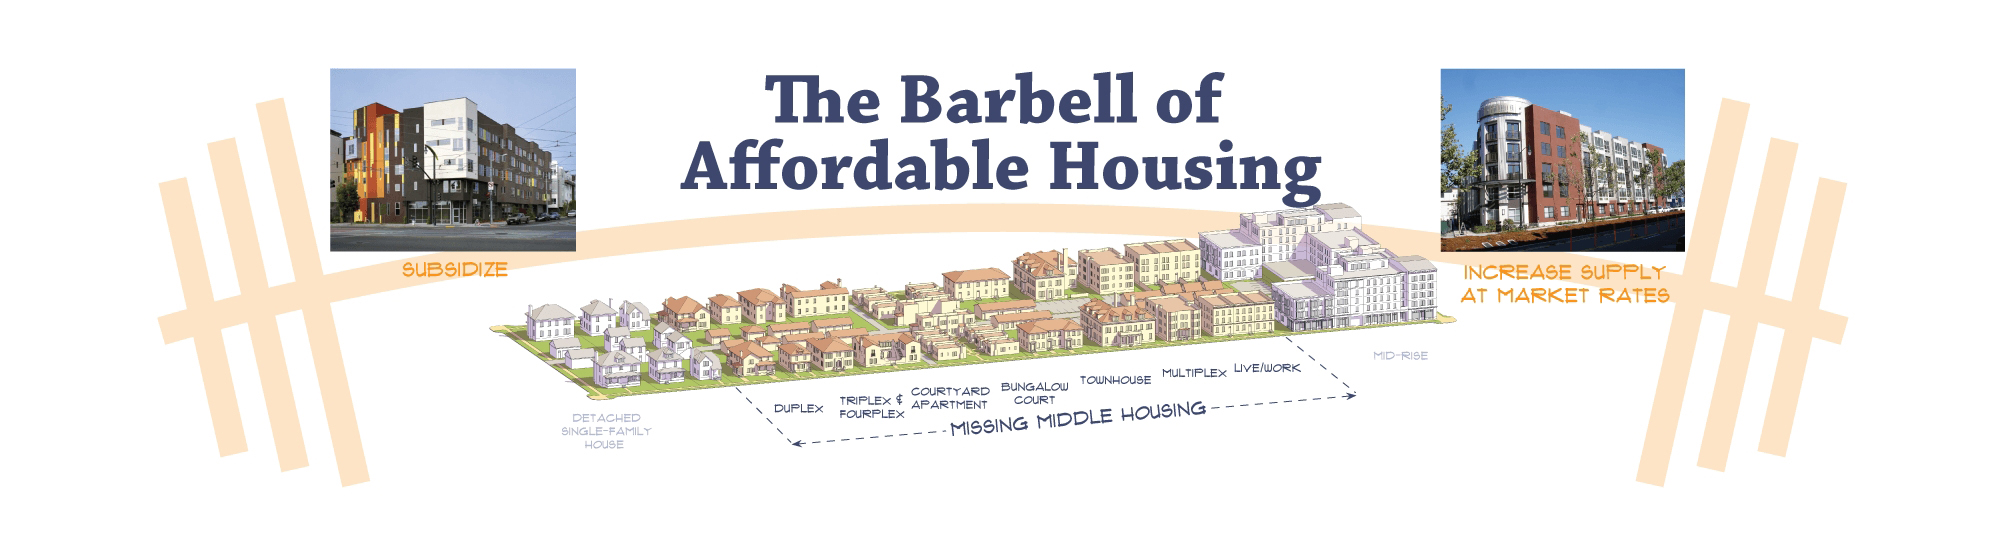 Two Extremes of Affordability; Missing Middle Housing Fills in the Gaps (Opticos Design)